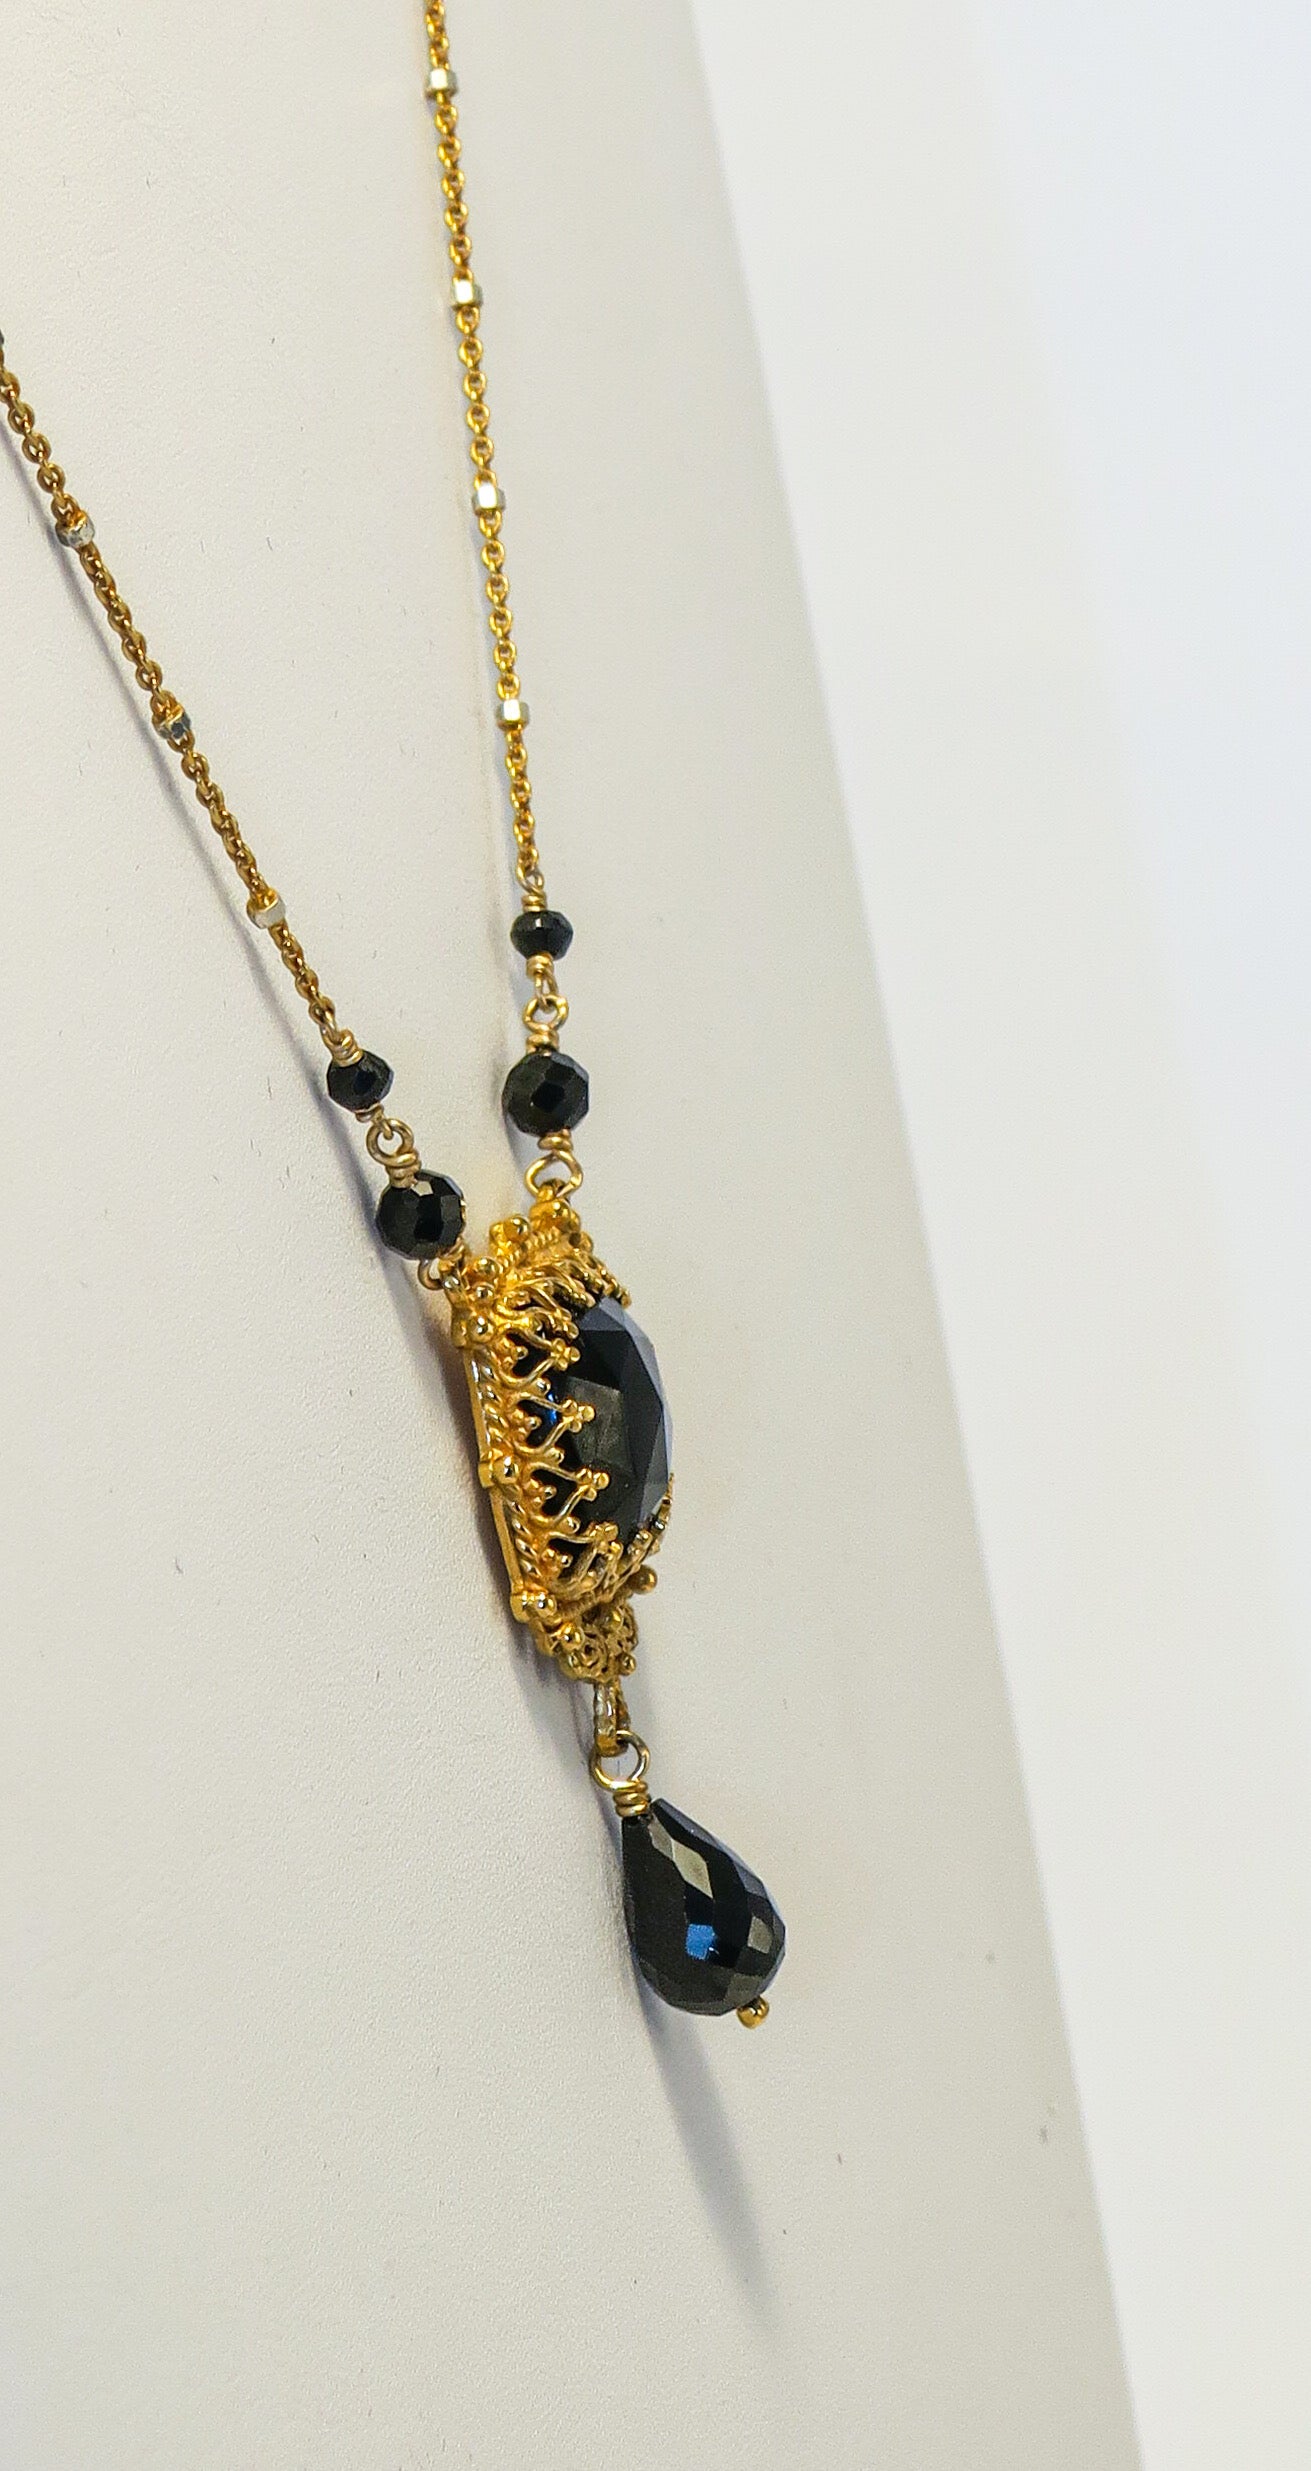 18K Gold Vermeil and Black Onyx Necklace | by Vanessa Mellet